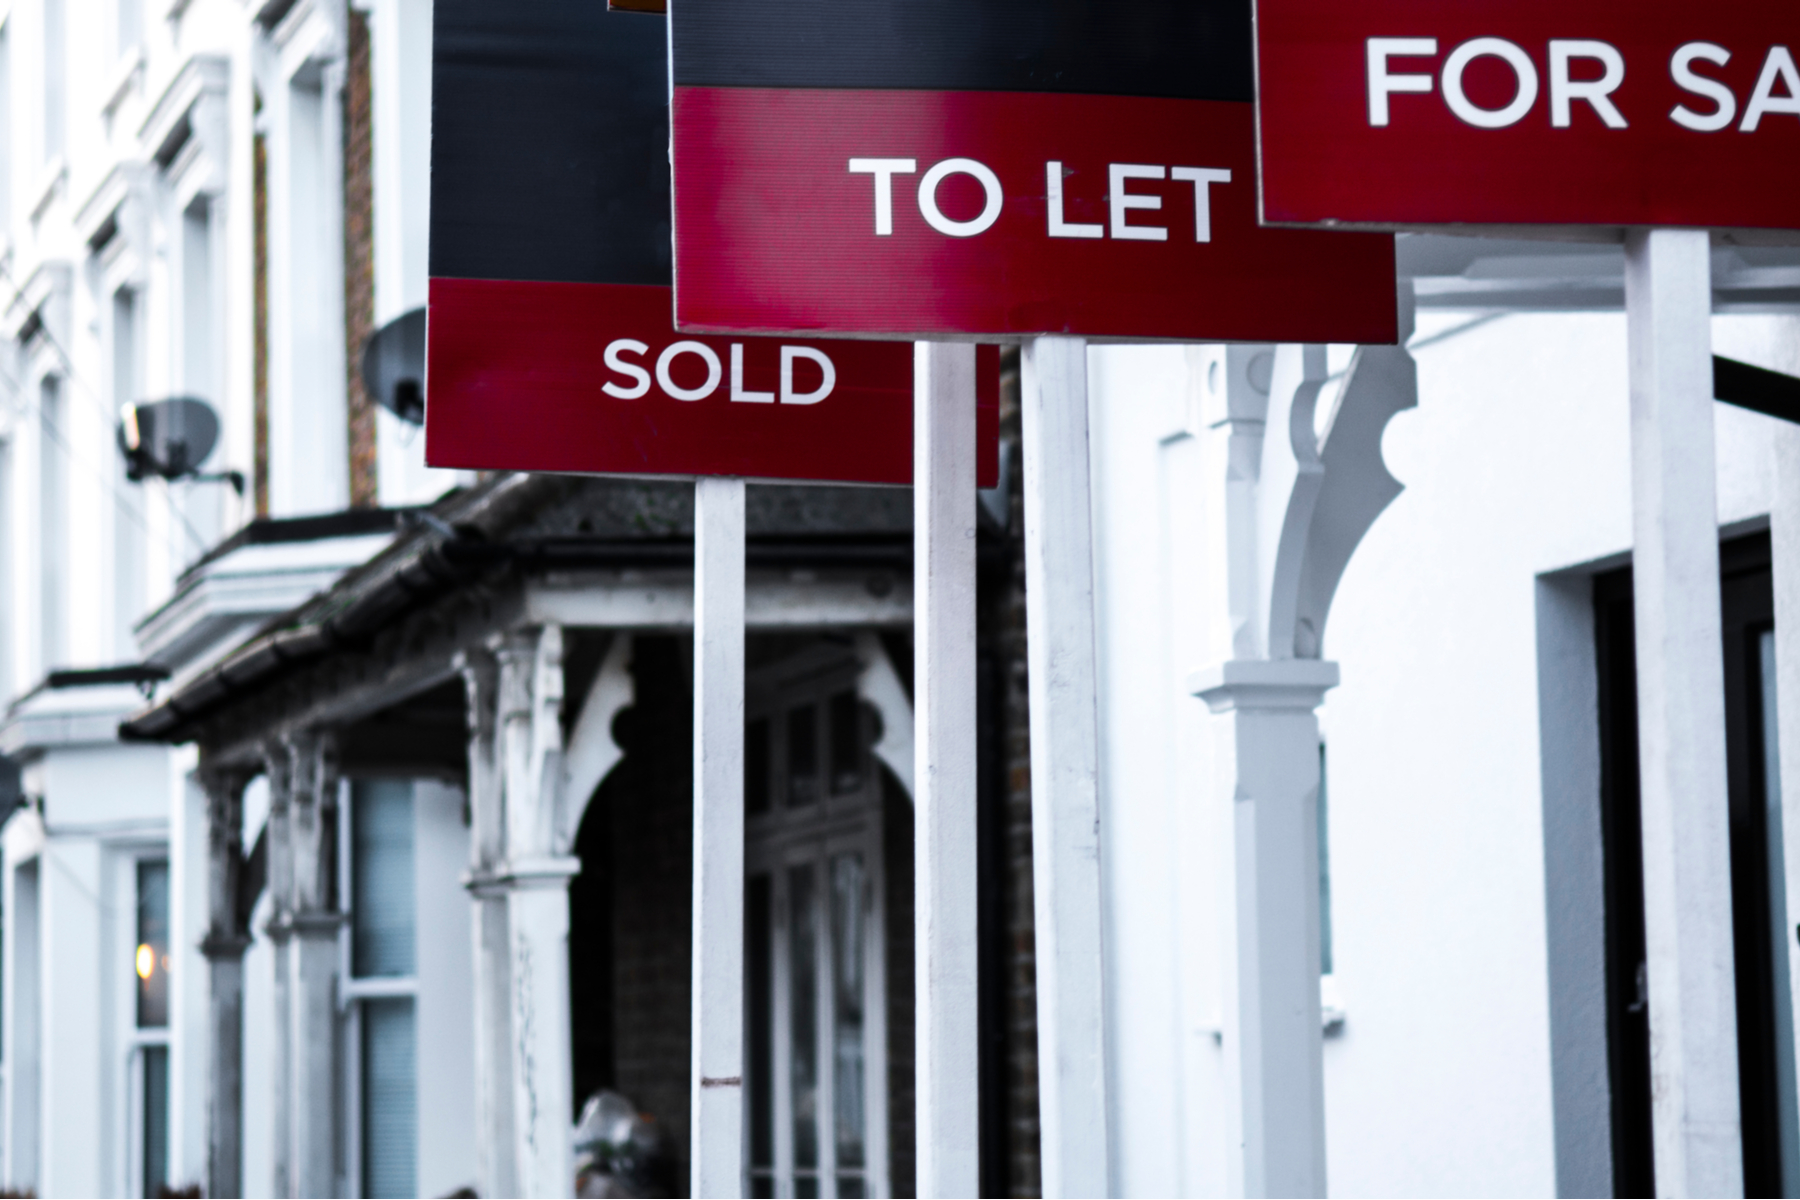 5 important points to consider if you are looking to purchase buy-to-let property this year